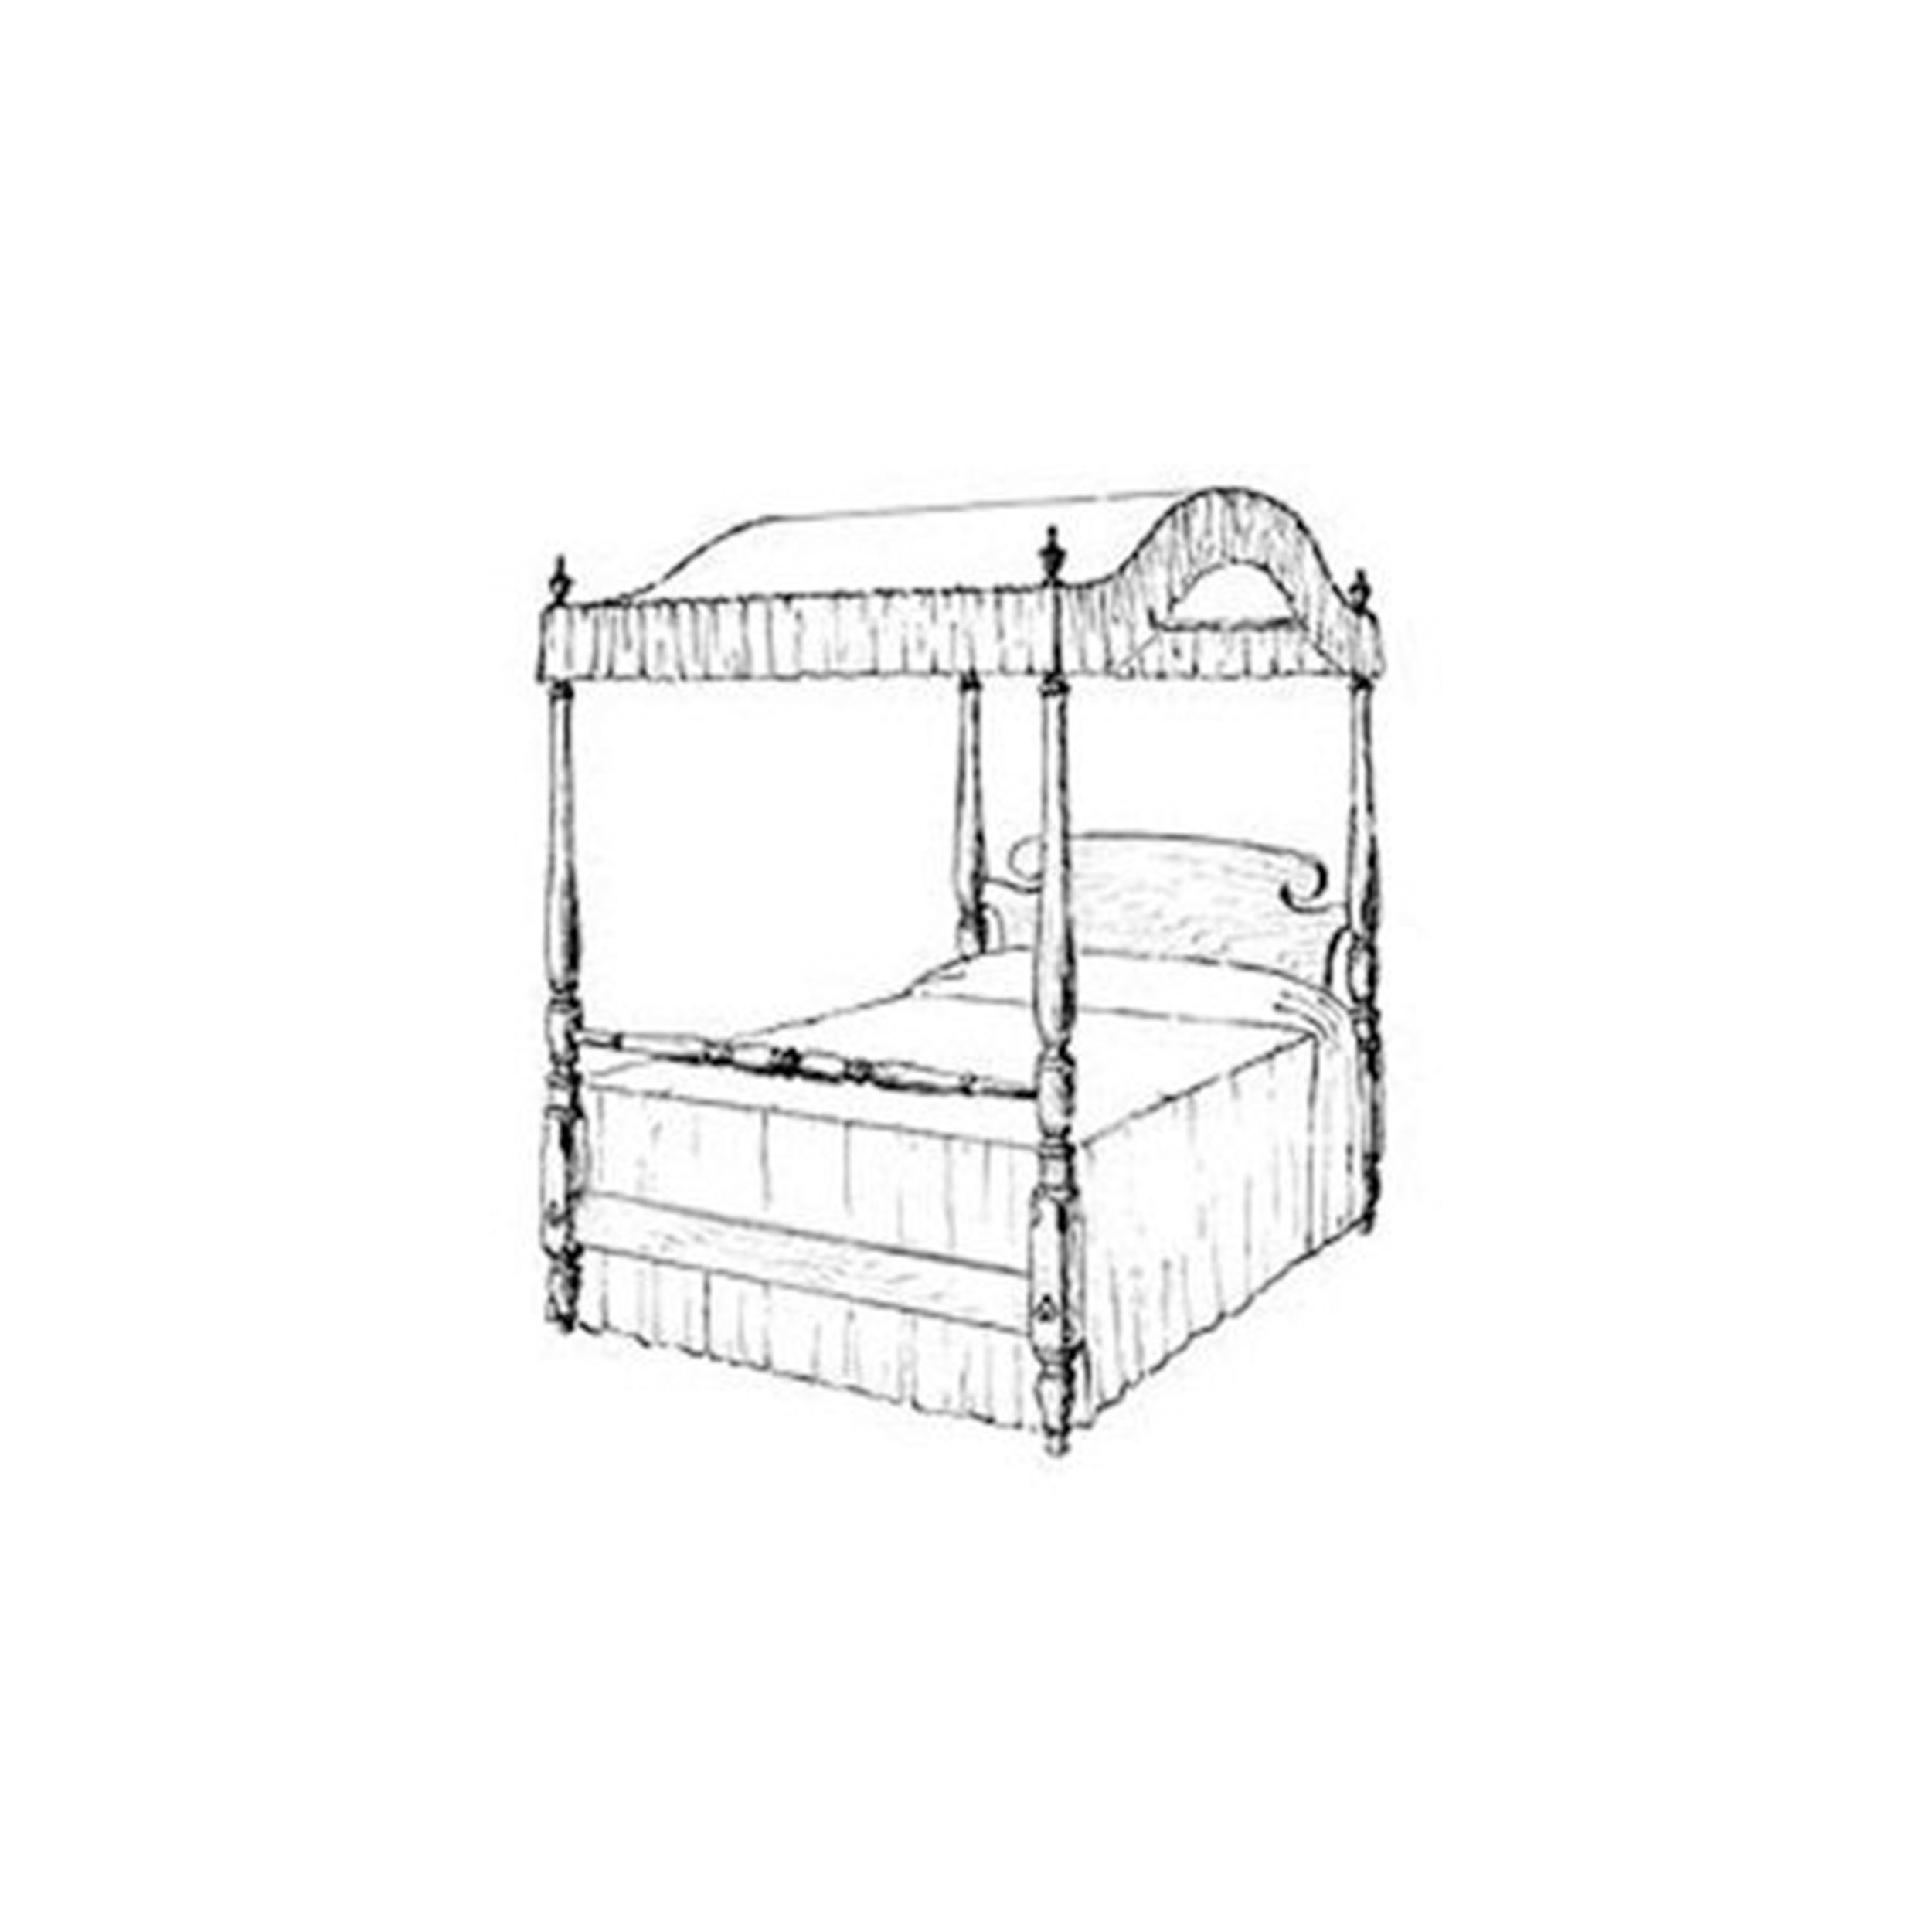 Woodworking Project Paper Plan To Build Canopy Bed